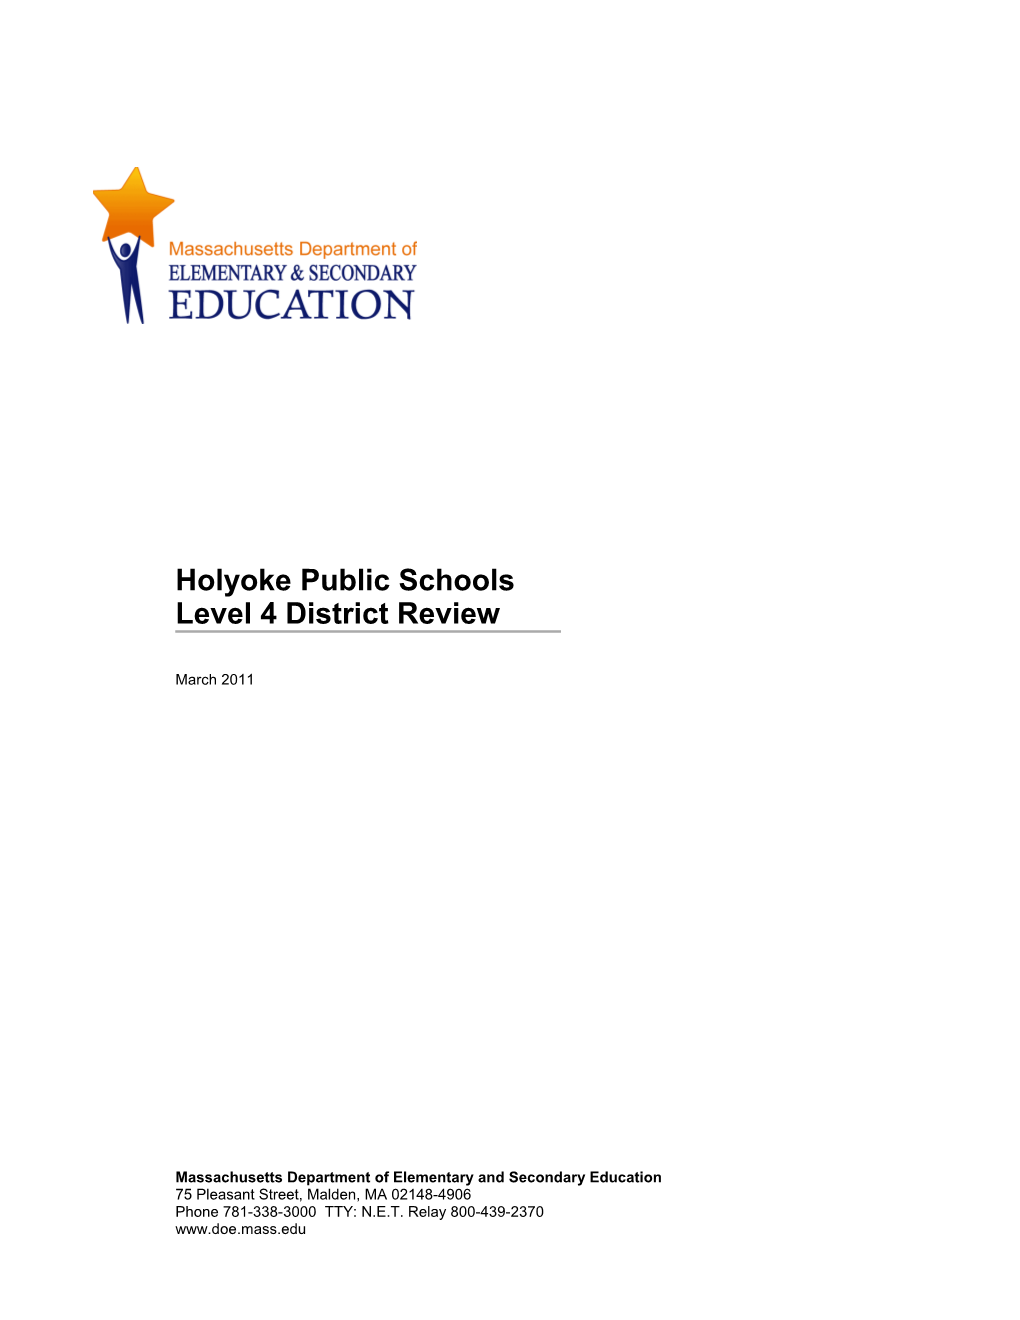 Holyoke Public Schools, Level 4 Review Report, March 2011